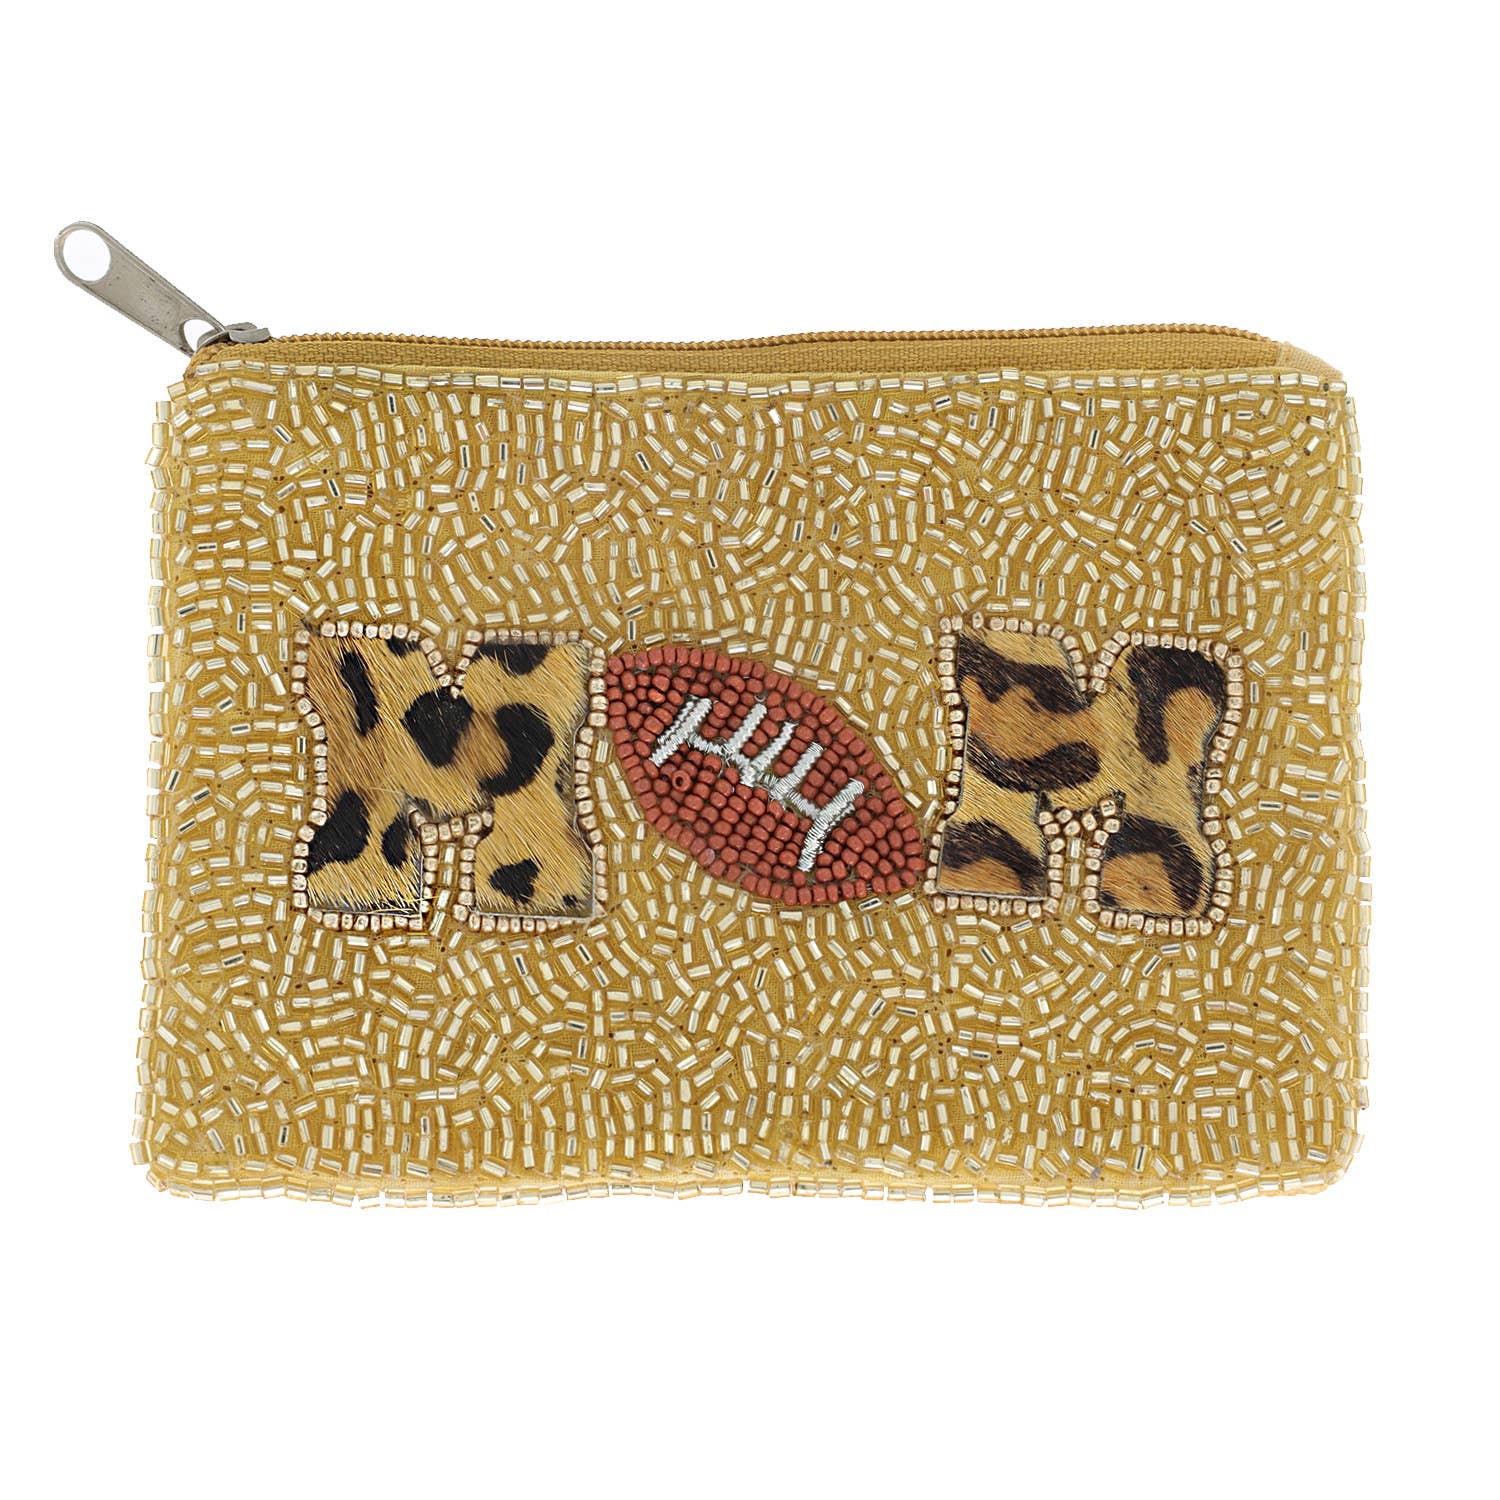 Football Coin Purse - Football Party Bag Fillers